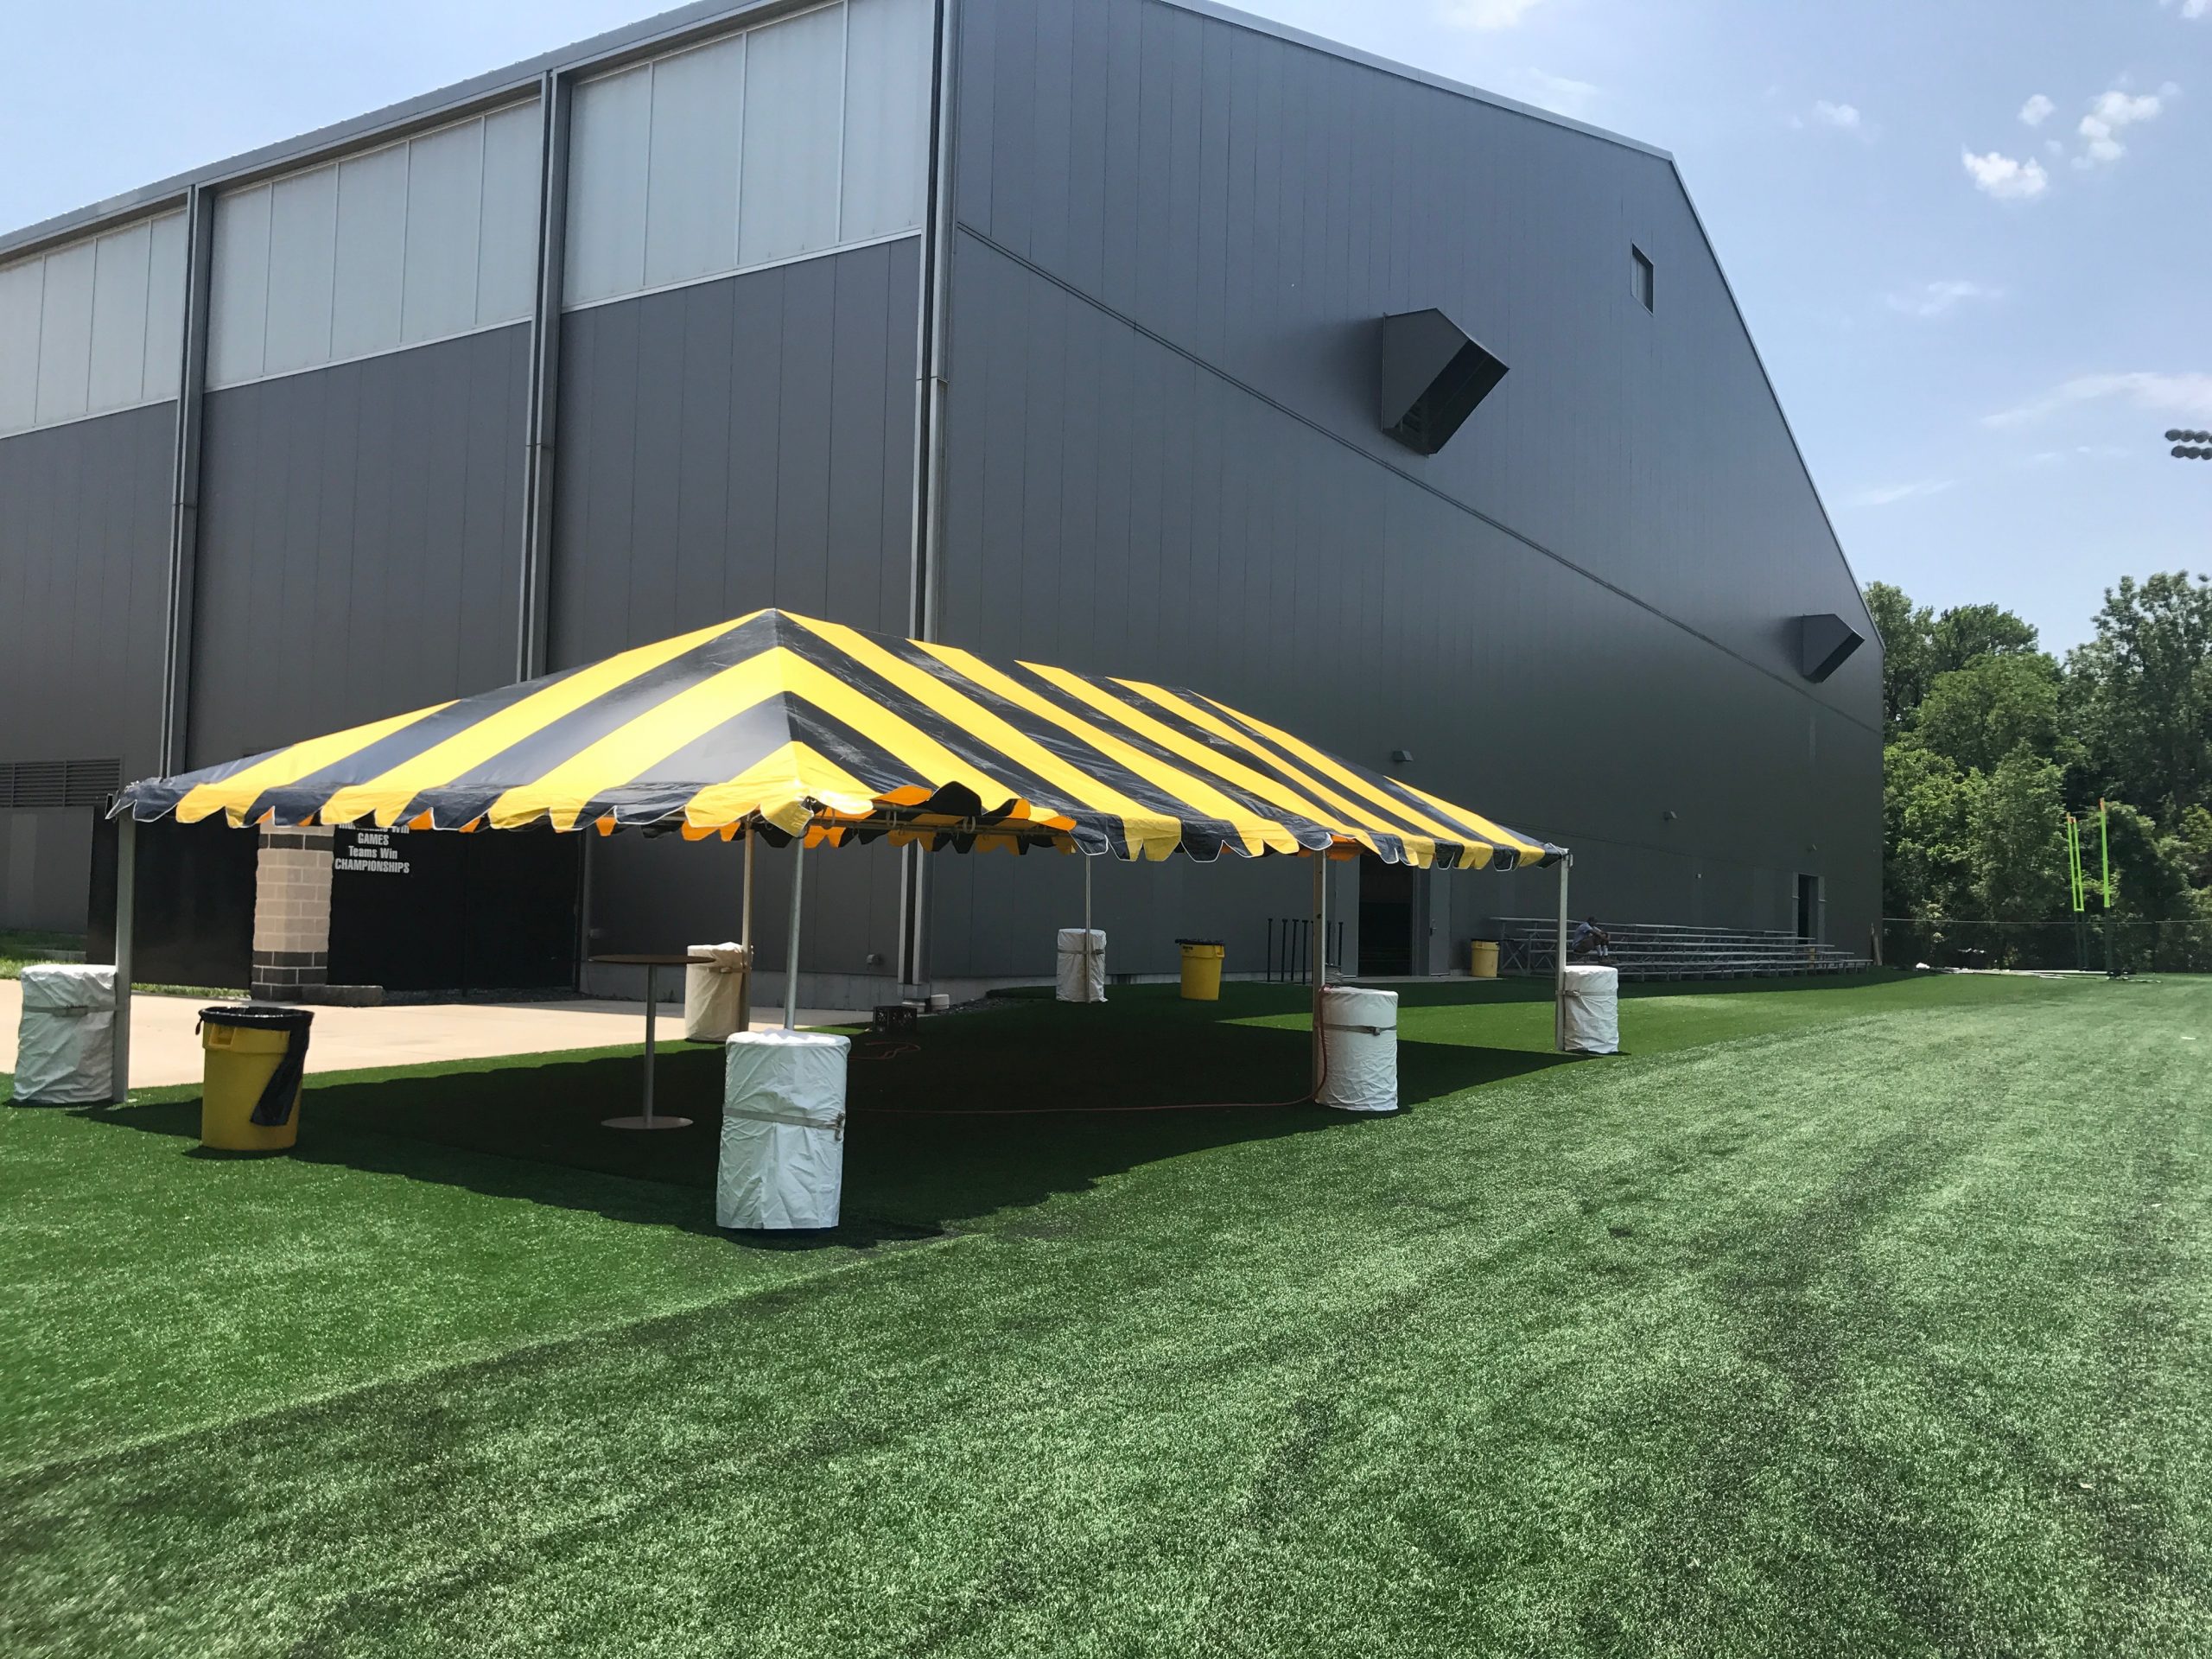 Black and Gold tent for the Ladies Football Academy at the University of Iowa 2017